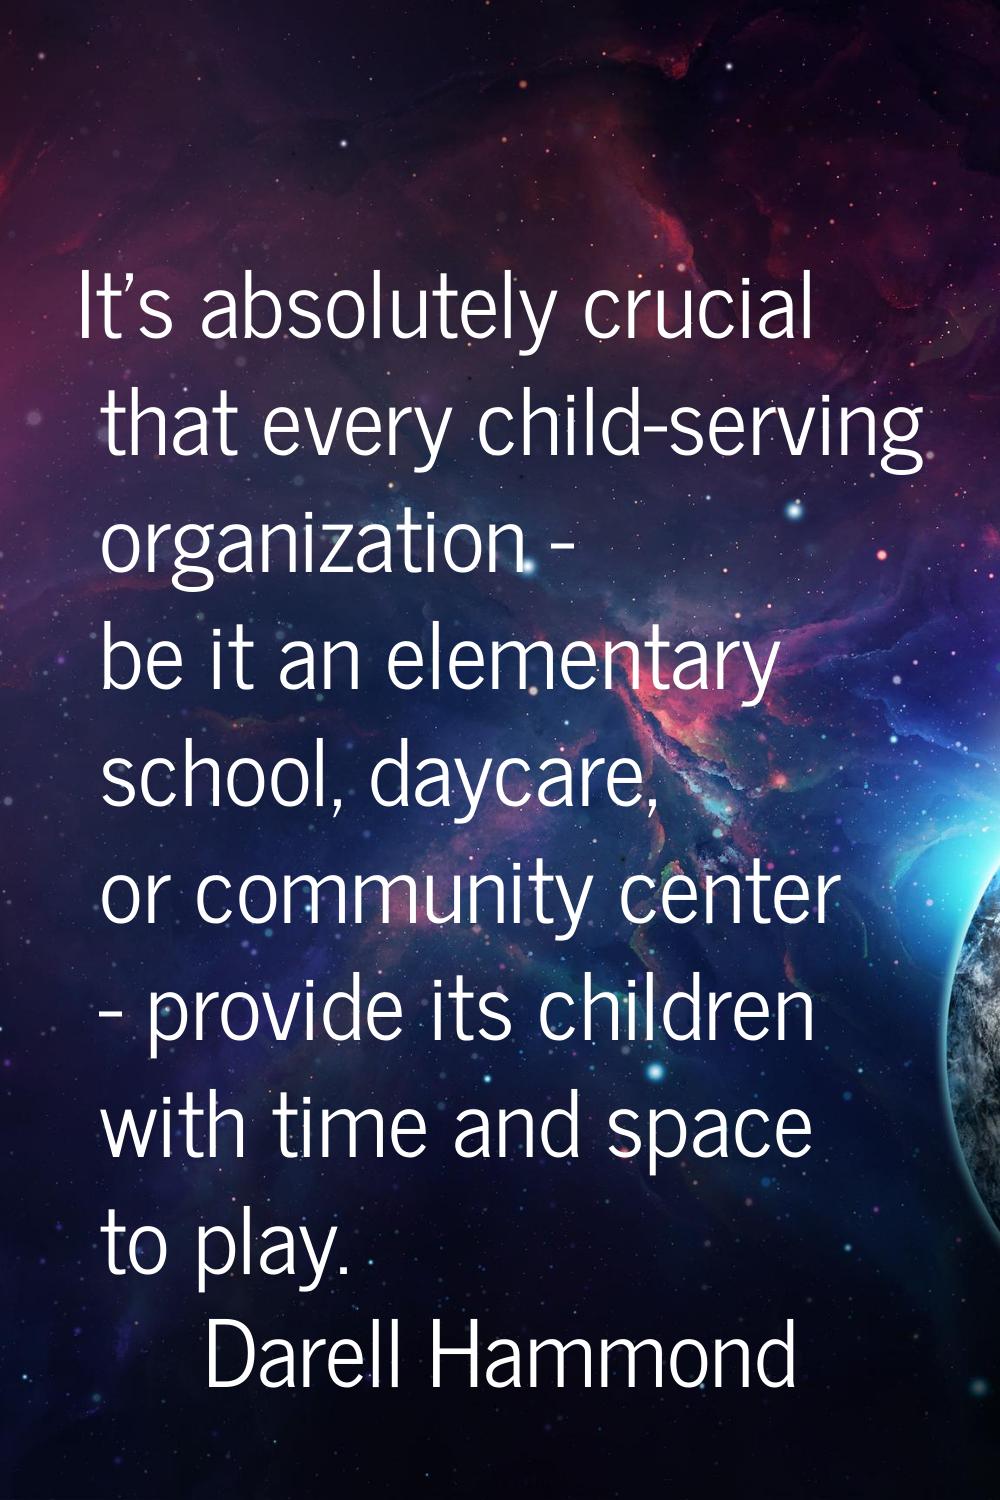 It's absolutely crucial that every child-serving organization - be it an elementary school, daycare